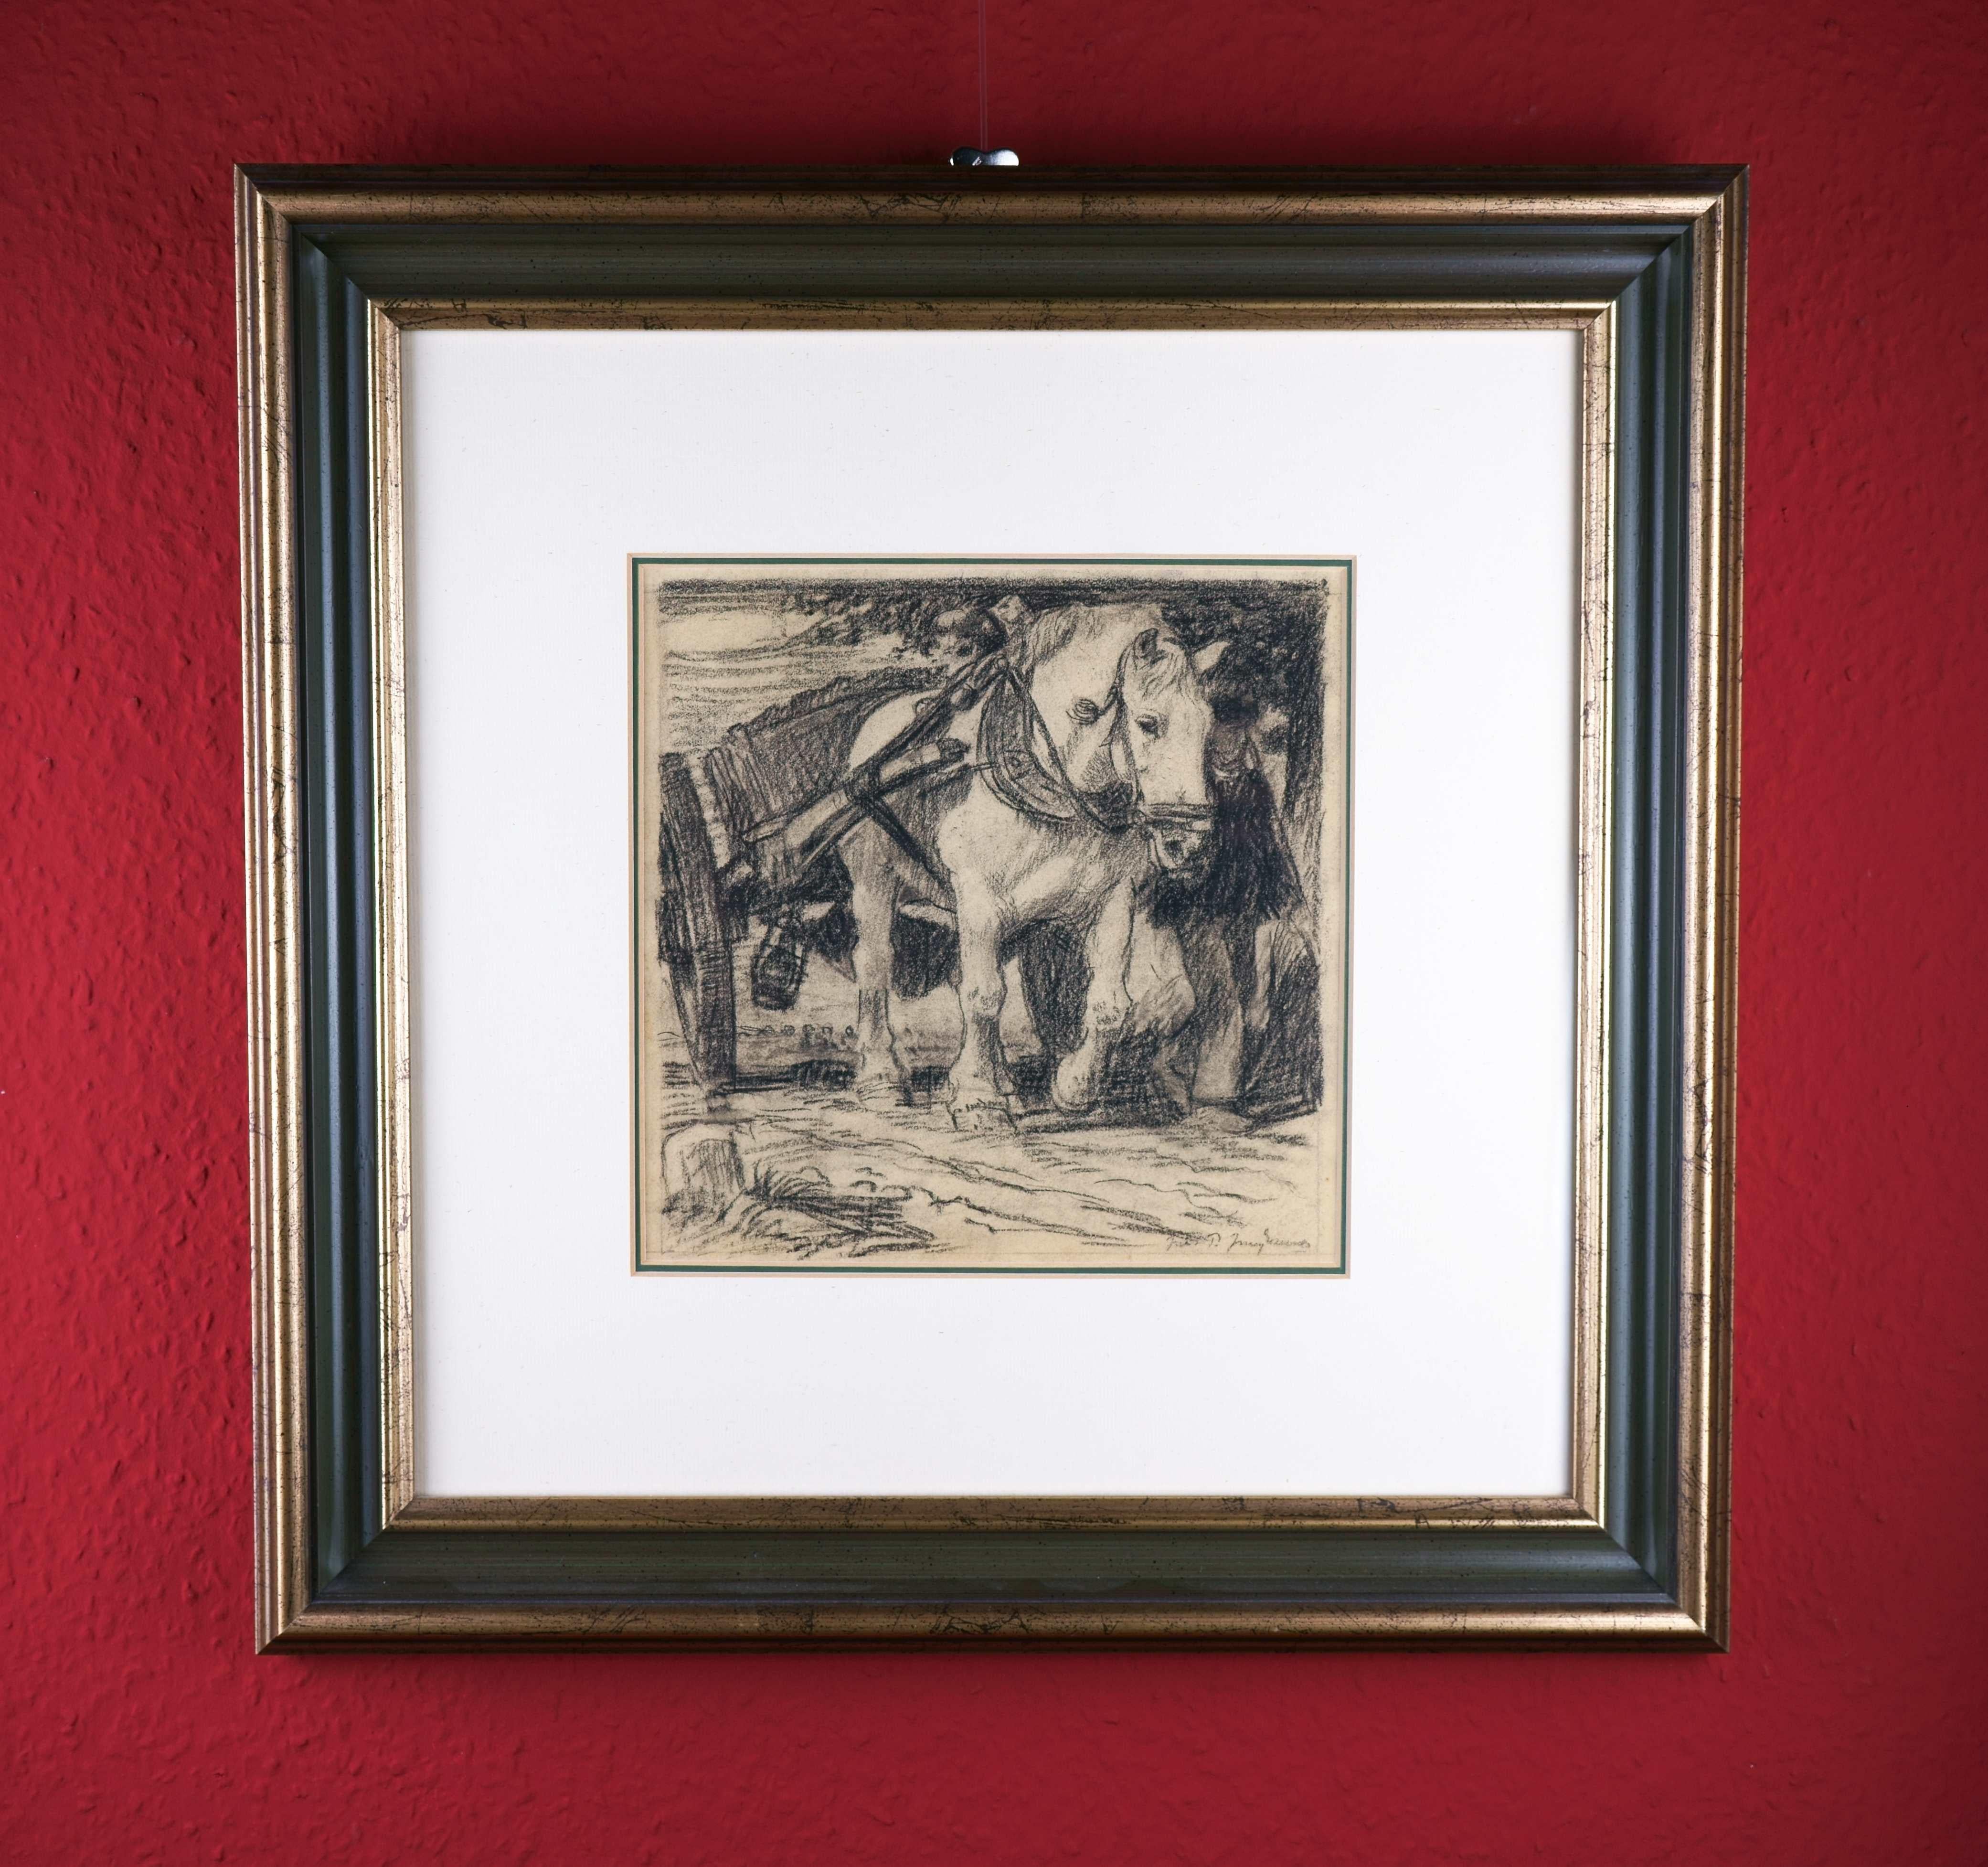 Julius Paul Junghanns (1876 Vienna - 1958 Düsseldorf), Draft Horse with Cart. Charcoal drawing on paper, 23 x 23 cm (inside measurement), 49 x 50 cm (frame), signed at lower right 